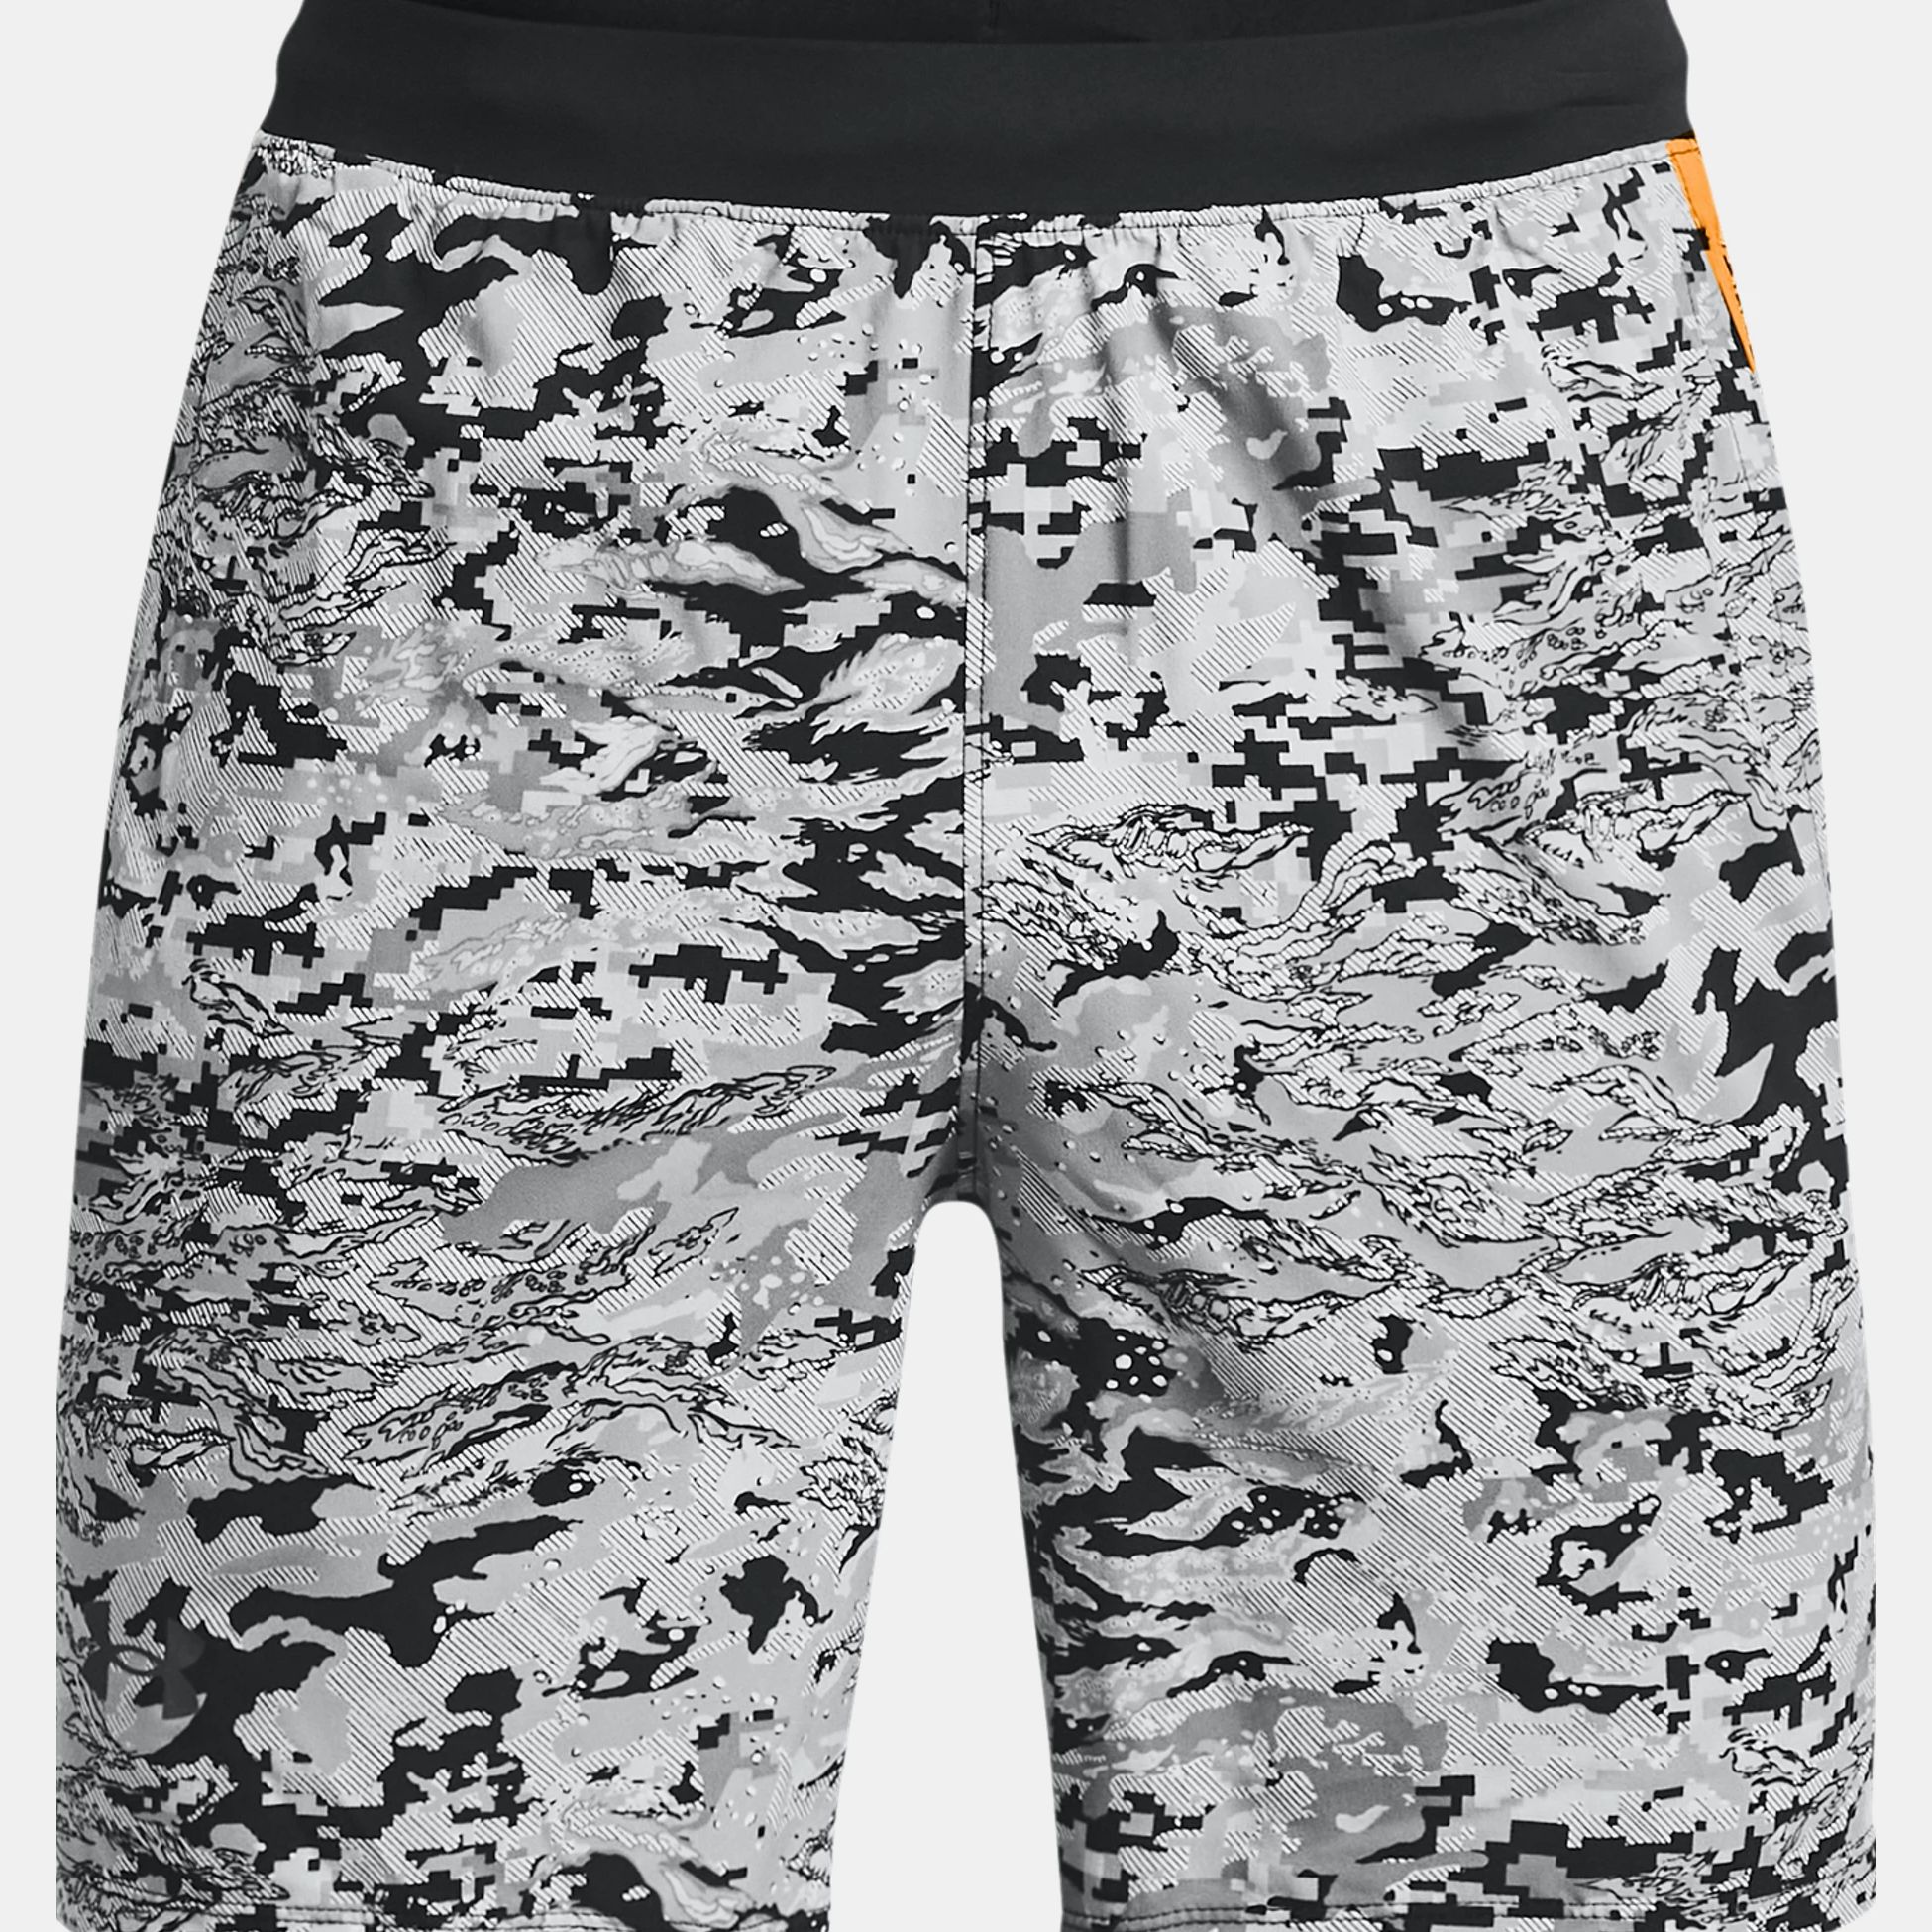 Shorts -  under armour  UA Launch 7 OOB Shorts